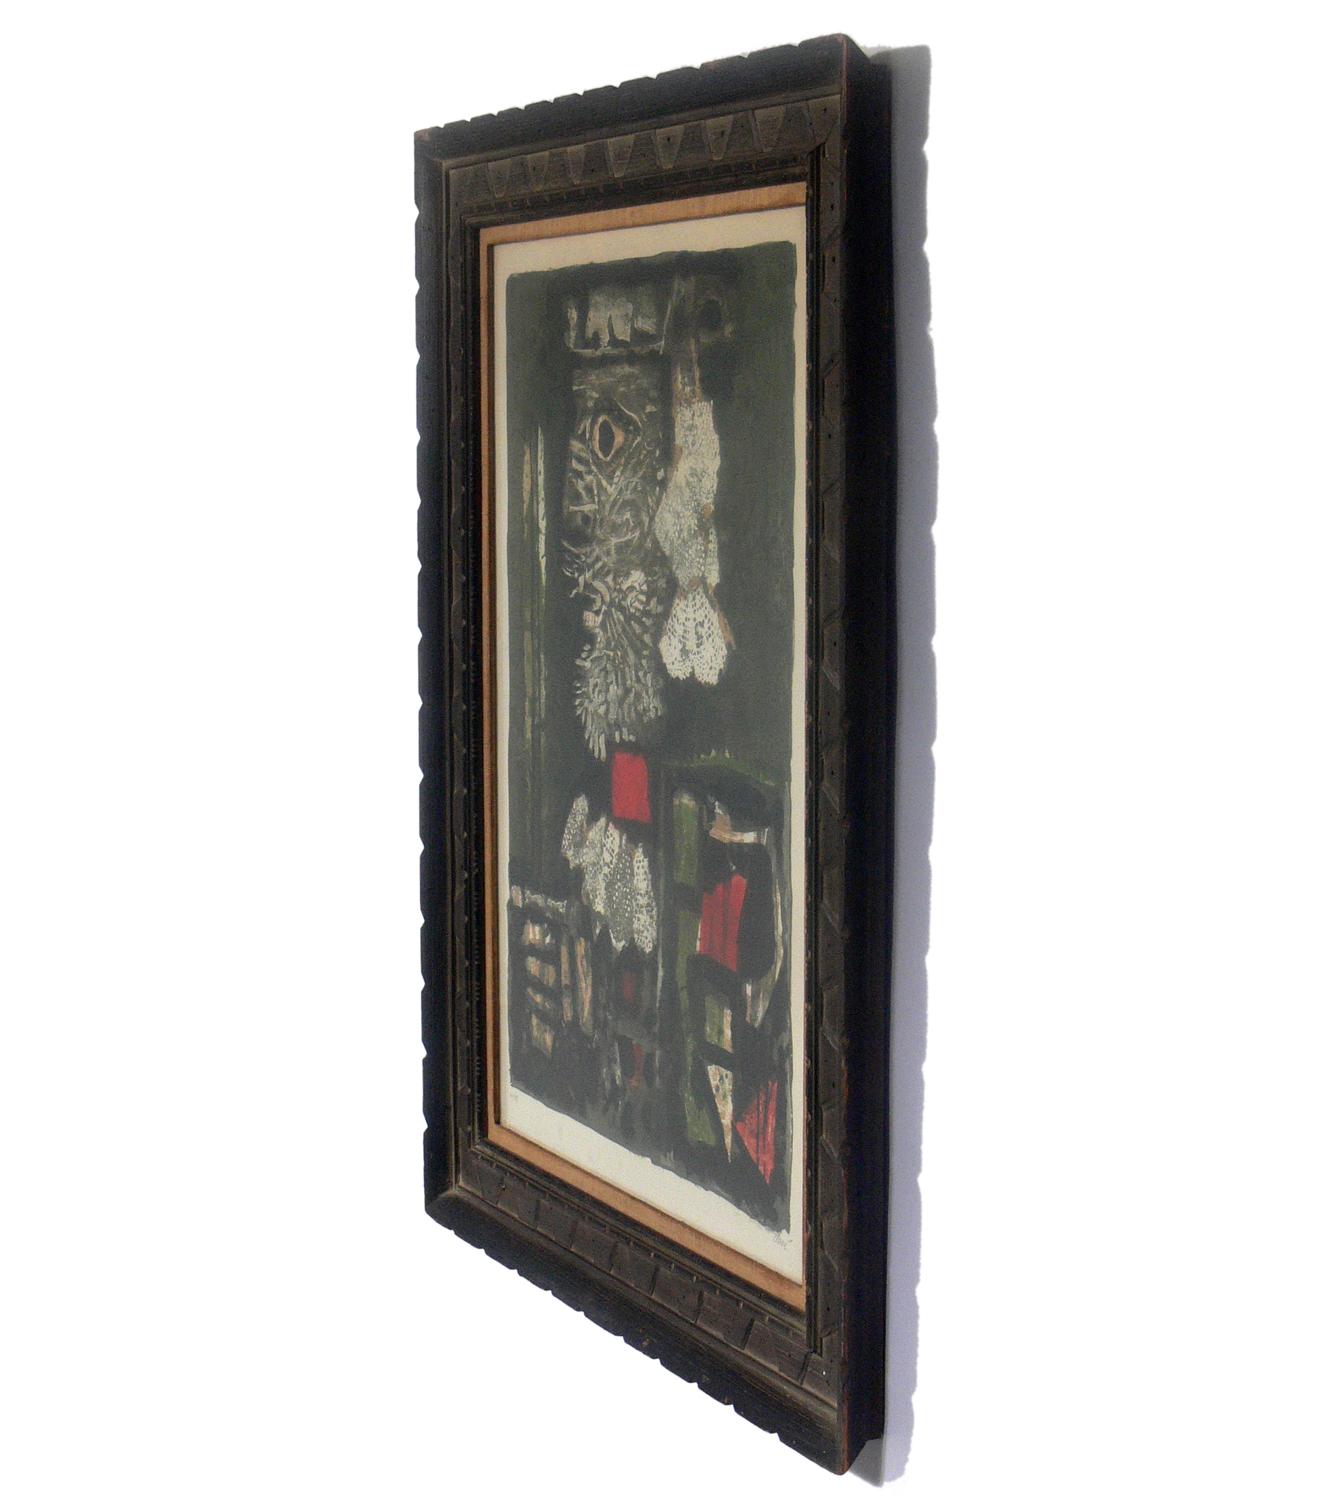 Large scale modernist lithograph, circa 1960s, by well listed Spanish artist Antoni Clave (1913-2006). Pencil signed and numbered from a very limited edition 60/99. Retains wonderful period carved wood frame. Clave's works are held in the